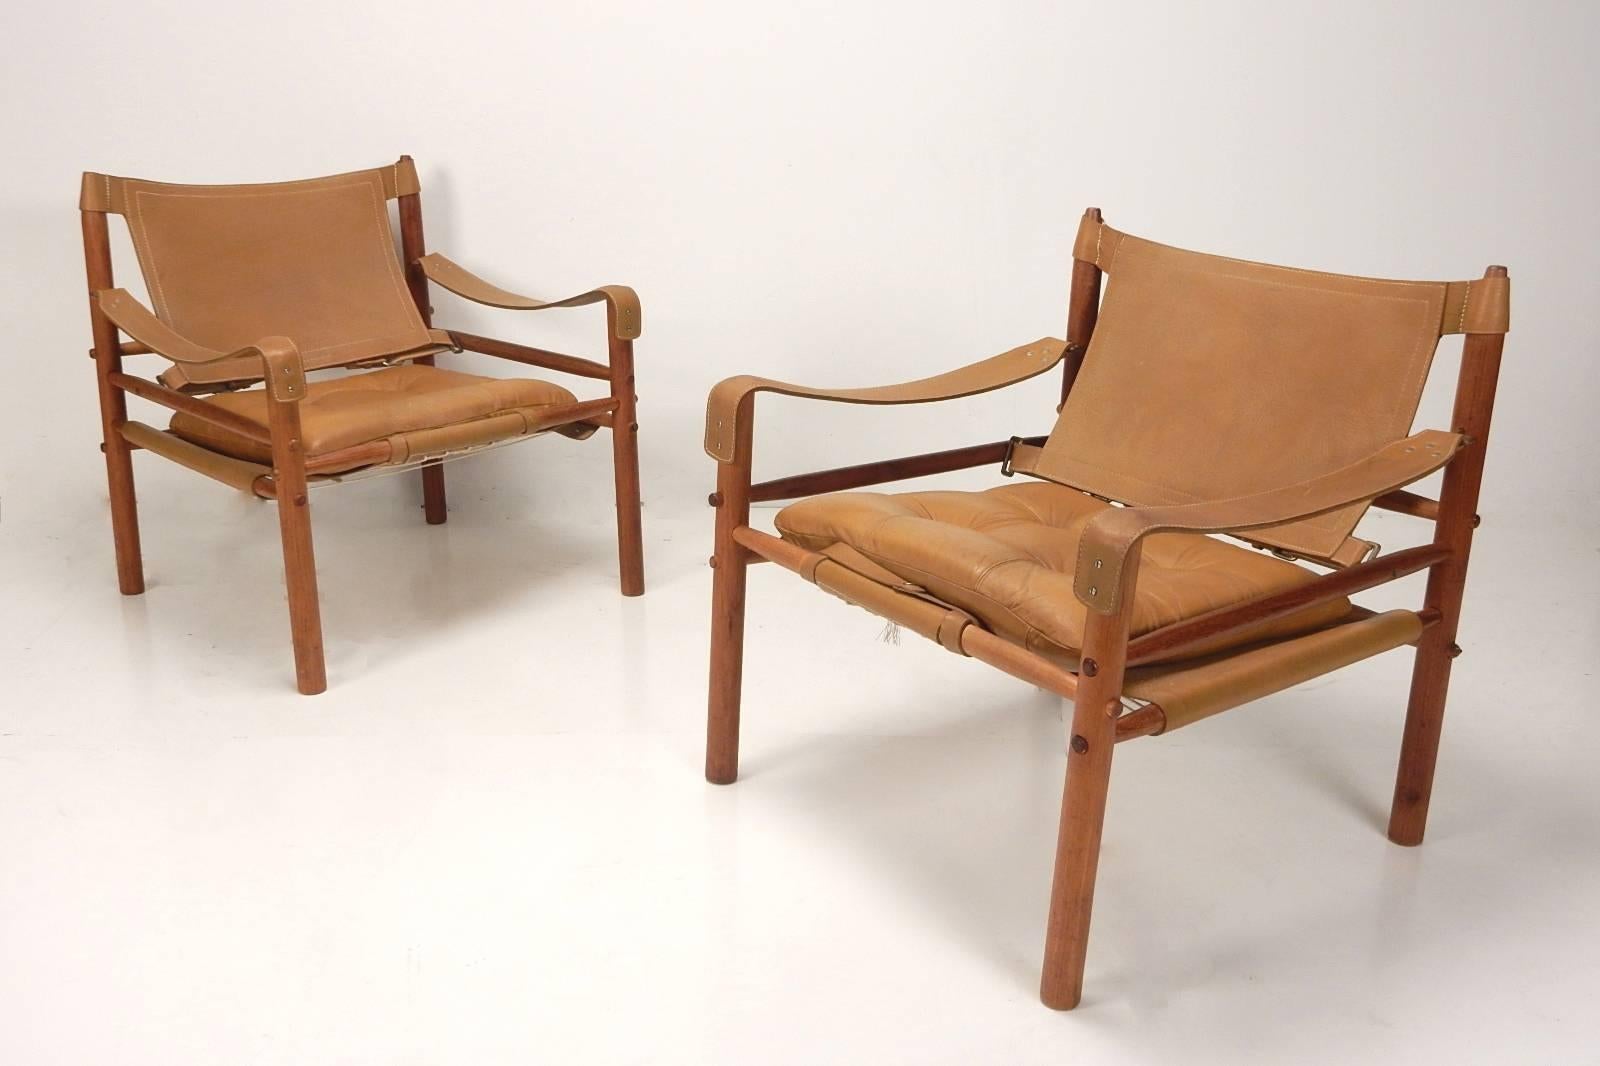 Matched pair of gorgeous Brazilian rosewood safari lounge chairs mounted with supple caramel leather straps and cushions.
Designed by Arne Norell for Scanform of Columbia.